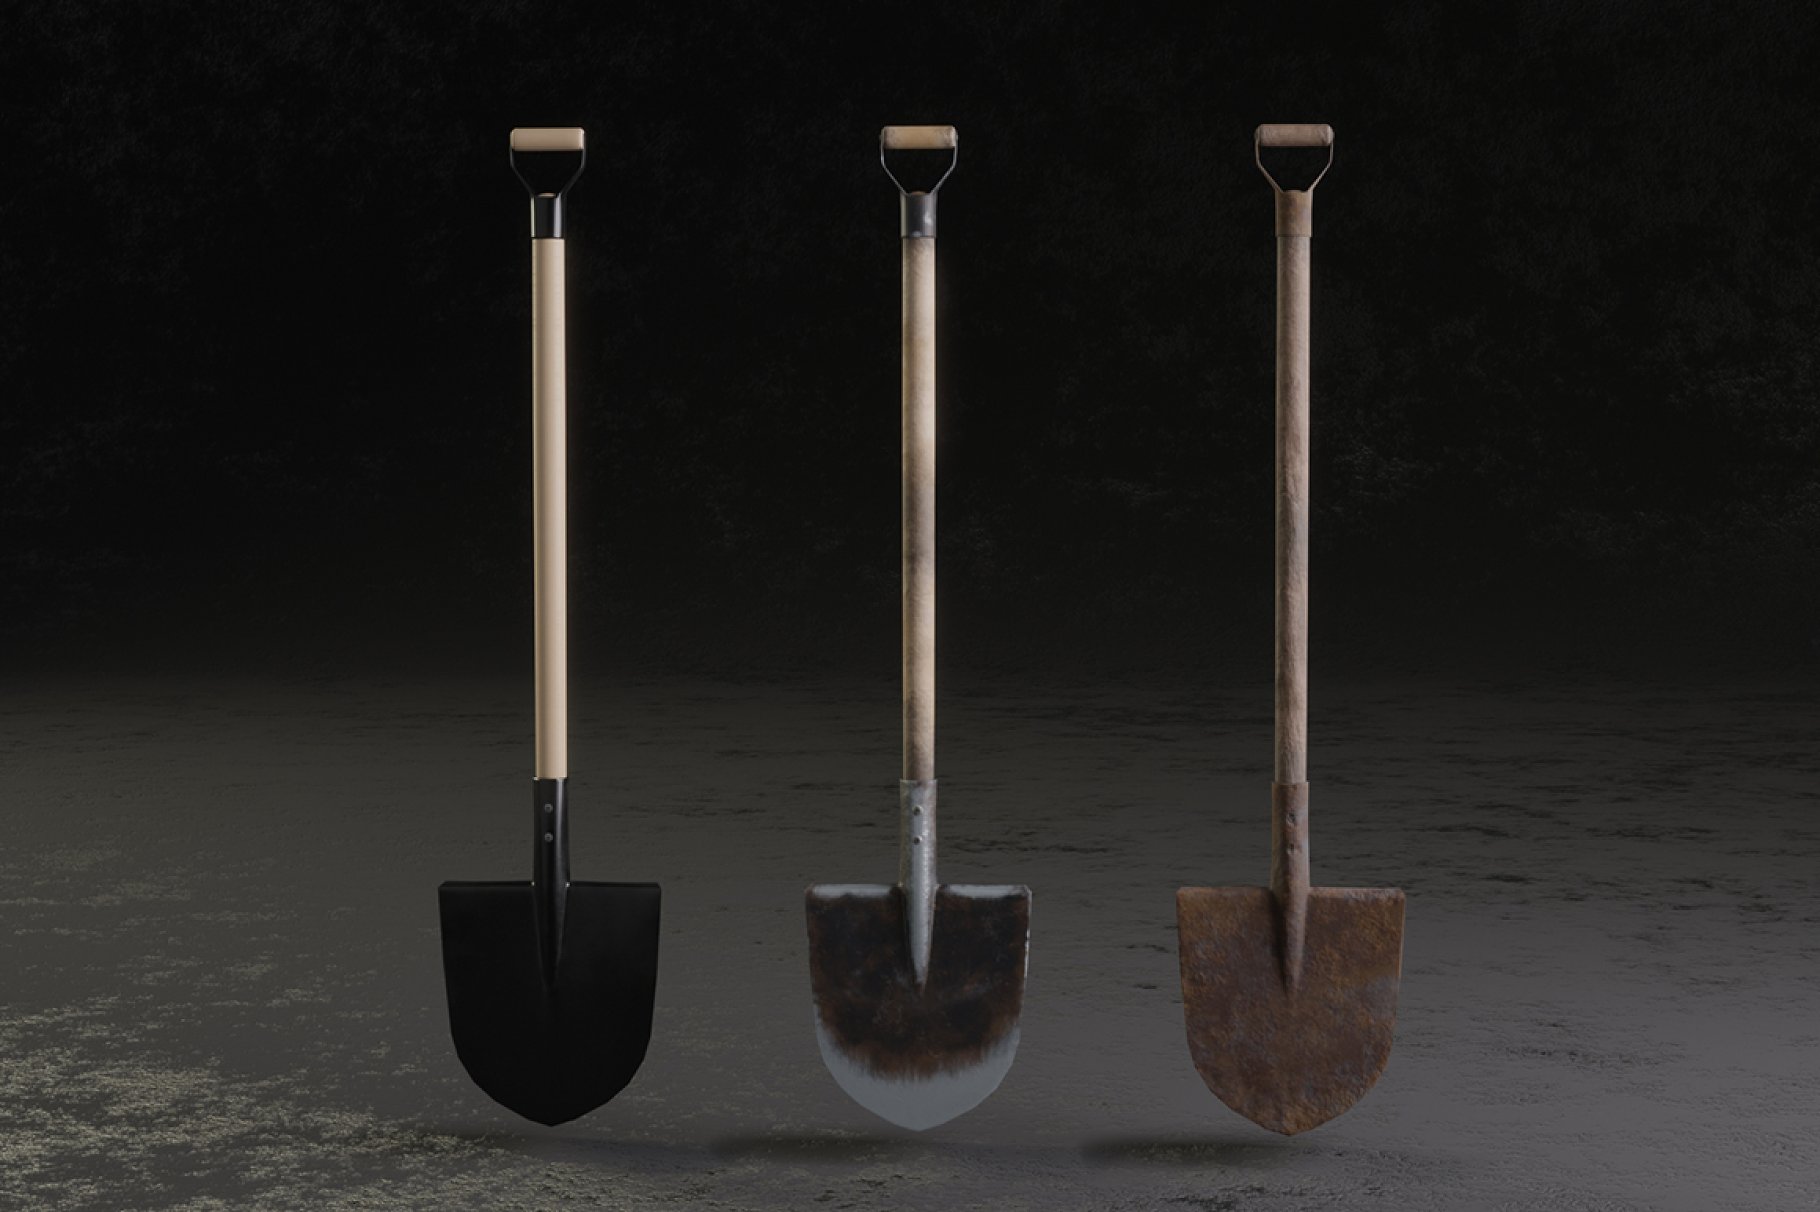 3 different pointed shovels with handles on a dark gray background.